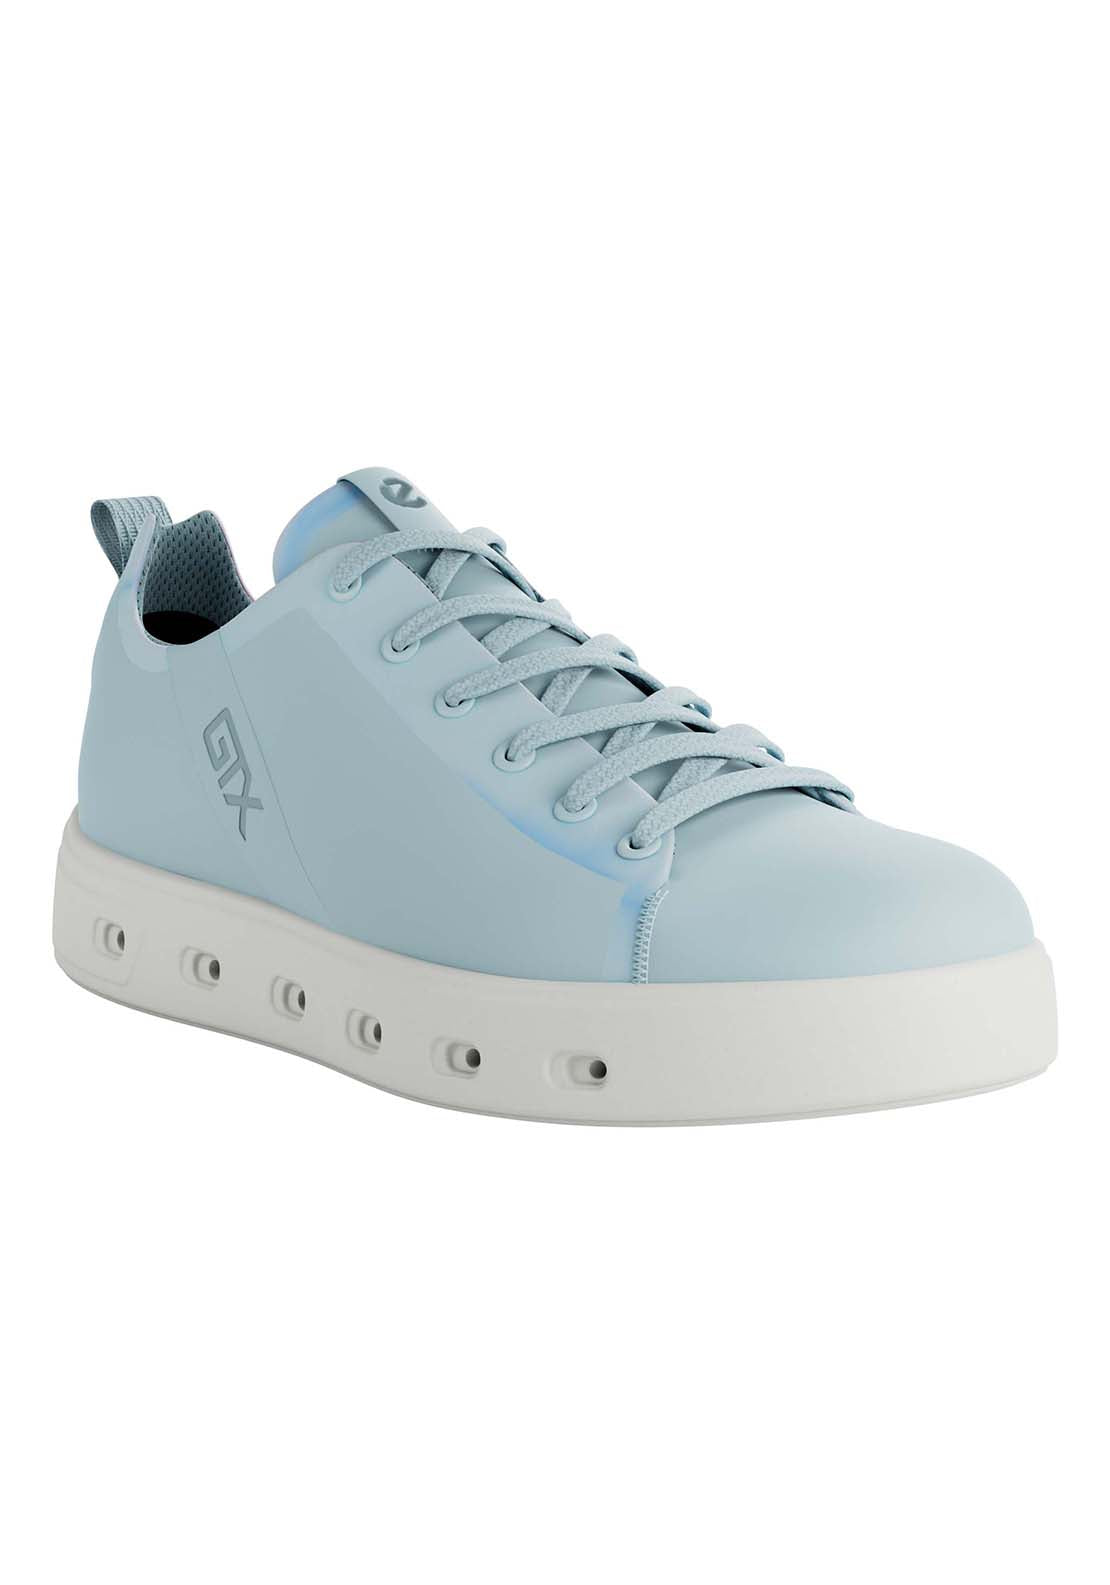 Ecco Street 720 Casual Shoe 1 Shaws Department Stores